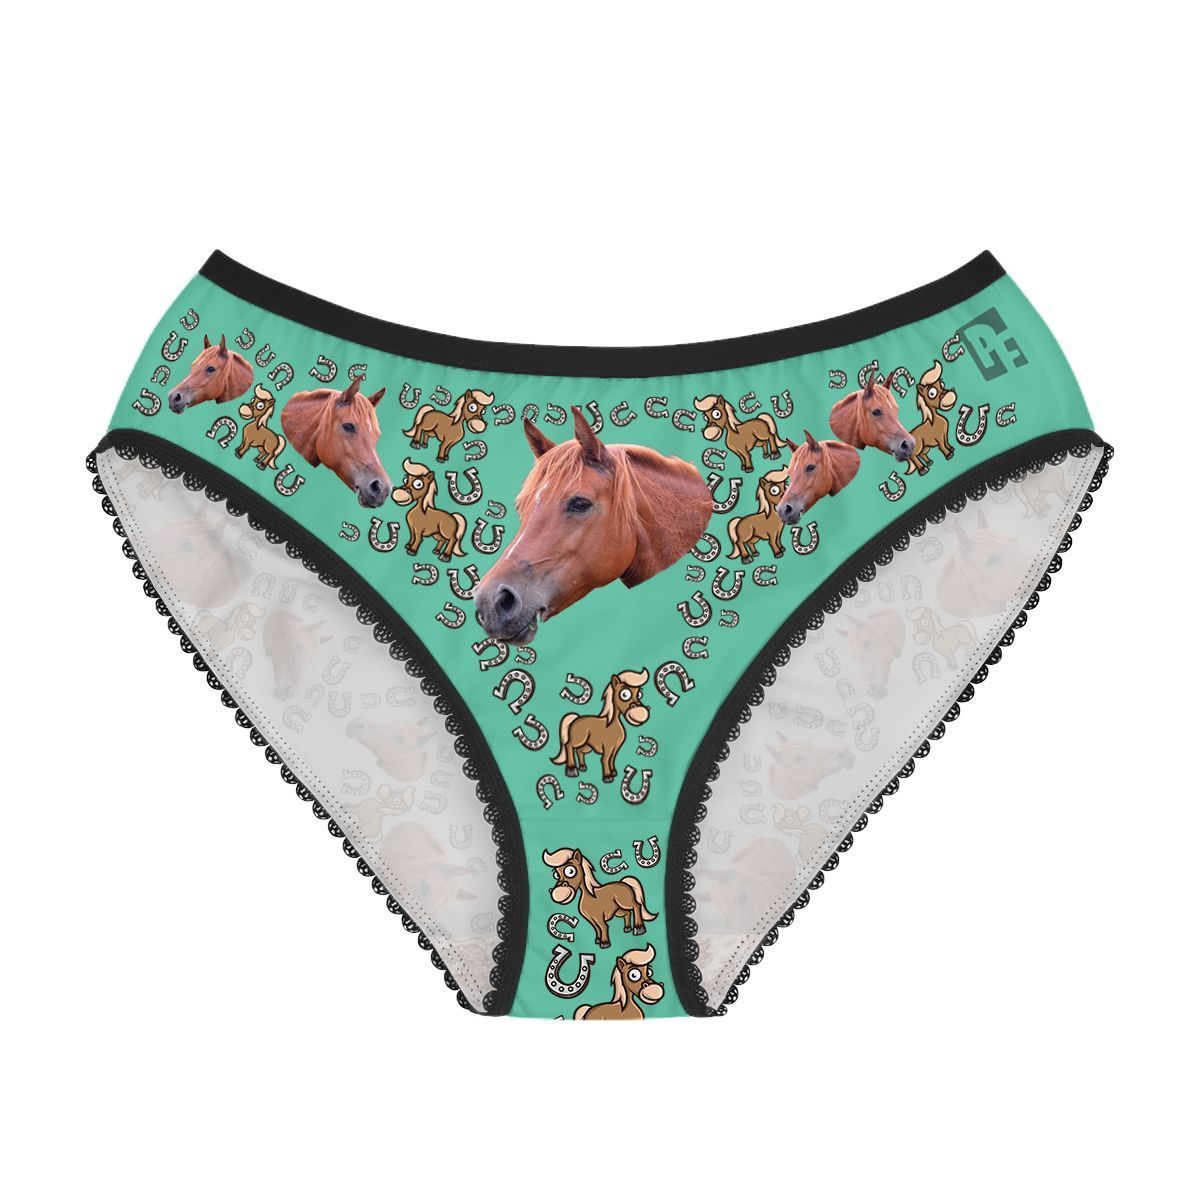 Mint Horse women's underwear briefs personalized with photo printed on them